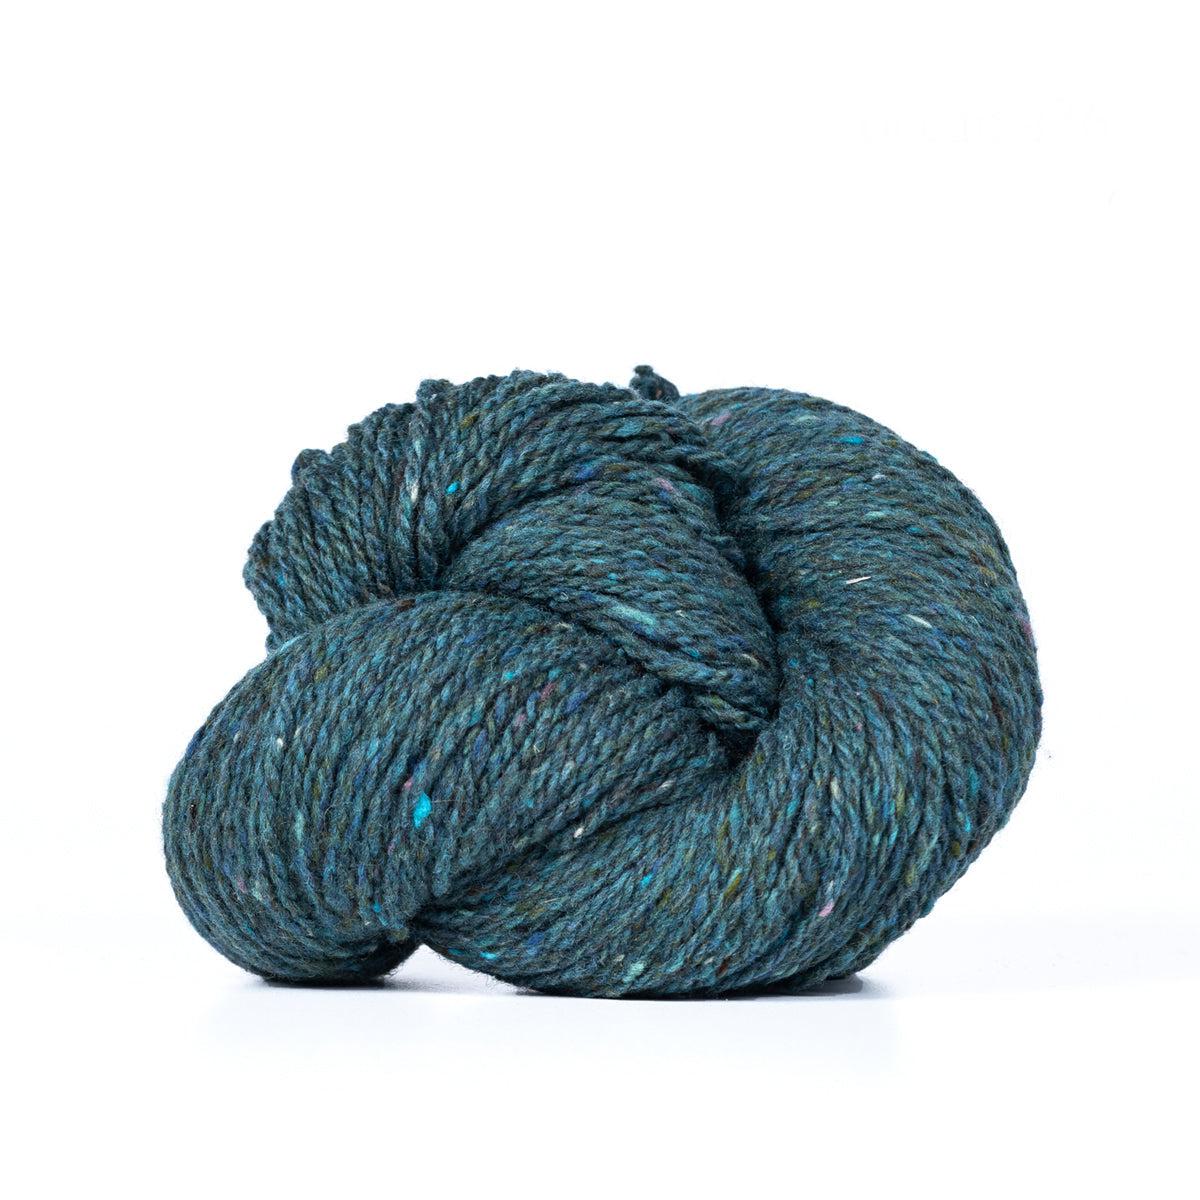 A skein of Kelbourne Woolens Lucky Tweed Ocean, a dark teal with brighter blue and grey flecks.